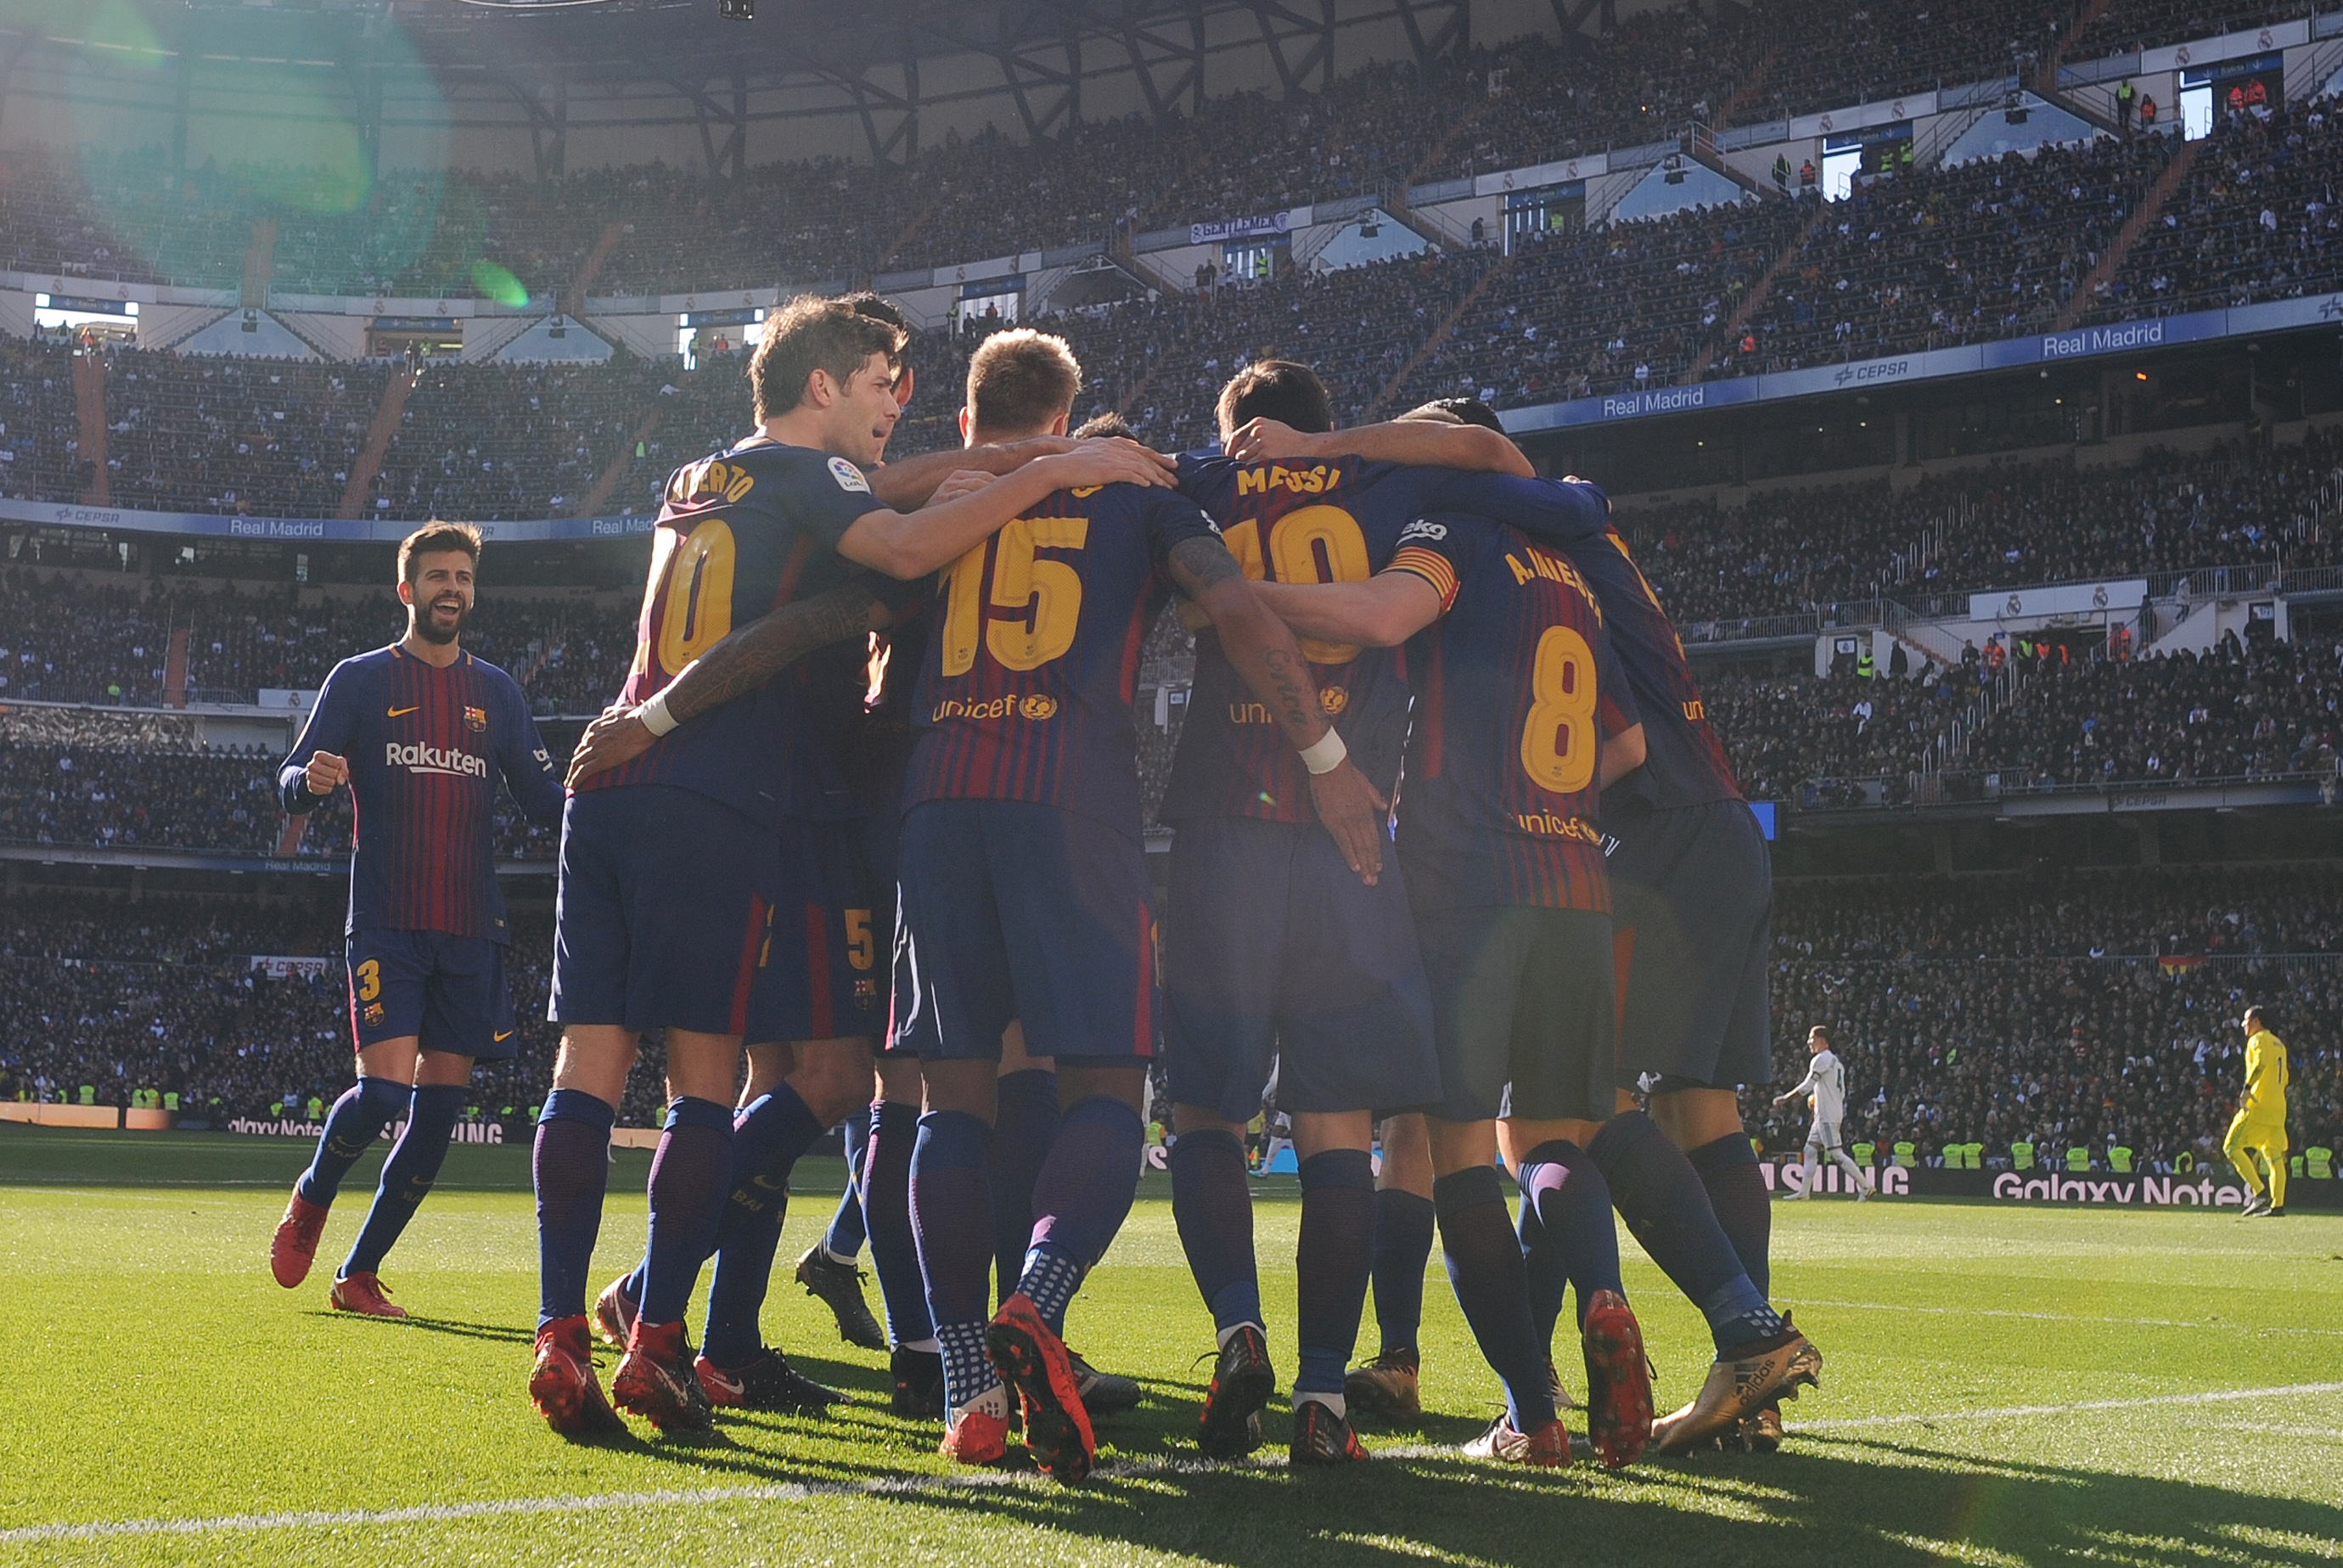 Barcelona cruised to a 3-0 win over Real Madrid at the Bernabeu back in December. (Photo courtesy - Denis Doyle/Getty Images)